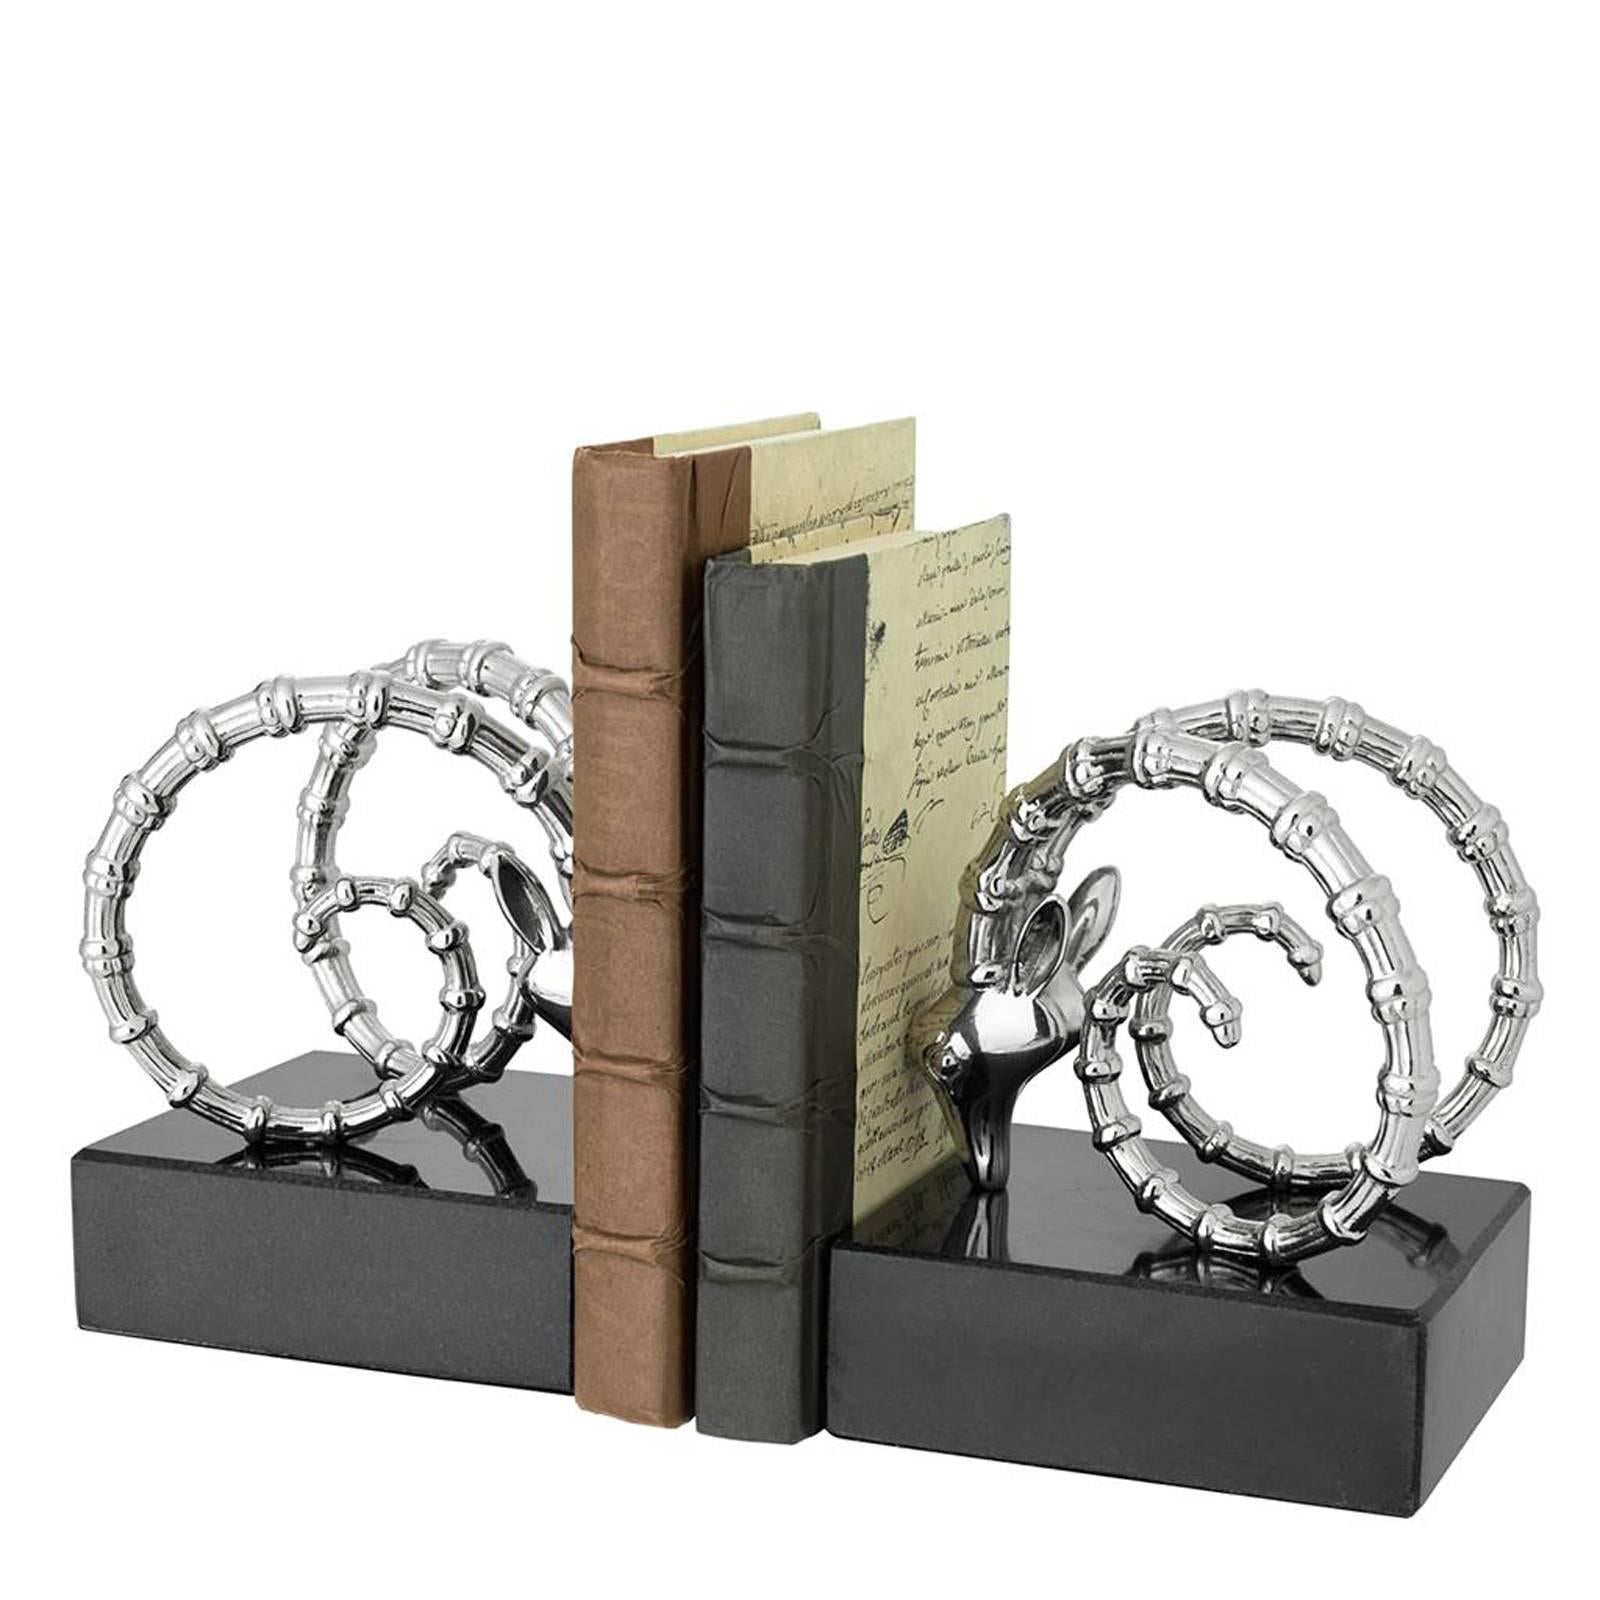 Indian Calabra Bookends Set of Two in Nickel Finish and Granite